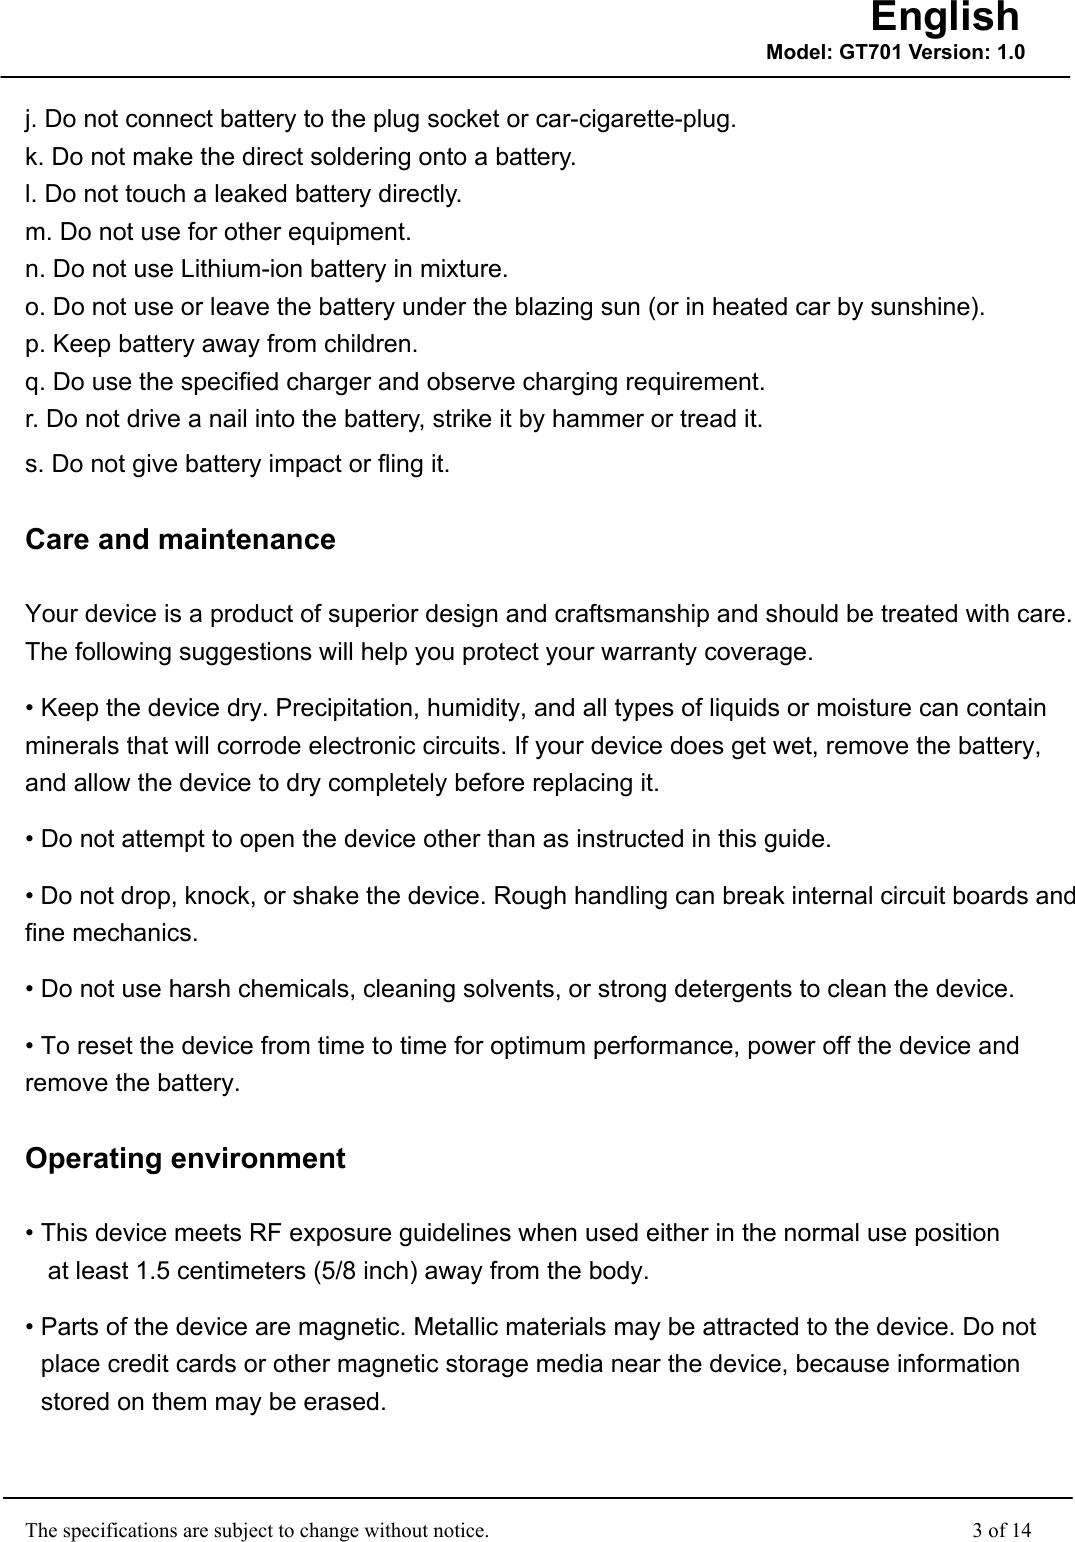                                                    The specifications are subject to change without notice.                                              3 of 14 English Model: GT701 Version: 1.0j. Do not connect battery to the plug socket or car-cigarette-plug. k. Do not make the direct soldering onto a battery. l. Do not touch a leaked battery directly. m. Do not use for other equipment. n. Do not use Lithium-ion battery in mixture. o. Do not use or leave the battery under the blazing sun (or in heated car by sunshine). p. Keep battery away from children. q. Do use the specified charger and observe charging requirement. r. Do not drive a nail into the battery, strike it by hammer or tread it. s. Do not give battery impact or fling it. Care and maintenance Your device is a product of superior design and craftsmanship and should be treated with care. The following suggestions will help you protect your warranty coverage. • Keep the device dry. Precipitation, humidity, and all types of liquids or moisture can contain minerals that will corrode electronic circuits. If your device does get wet, remove the battery, and allow the device to dry completely before replacing it. • Do not attempt to open the device other than as instructed in this guide. • Do not drop, knock, or shake the device. Rough handling can break internal circuit boards and fine mechanics. • Do not use harsh chemicals, cleaning solvents, or strong detergents to clean the device. • To reset the device from time to time for optimum performance, power off the device and remove the battery. Operating environment • This device meets RF exposure guidelines when used either in the normal use position  at least 1.5 centimeters (5/8 inch) away from the body. • Parts of the device are magnetic. Metallic materials may be attracted to the device. Do not place credit cards or other magnetic storage media near the device, because information stored on them may be erased. 